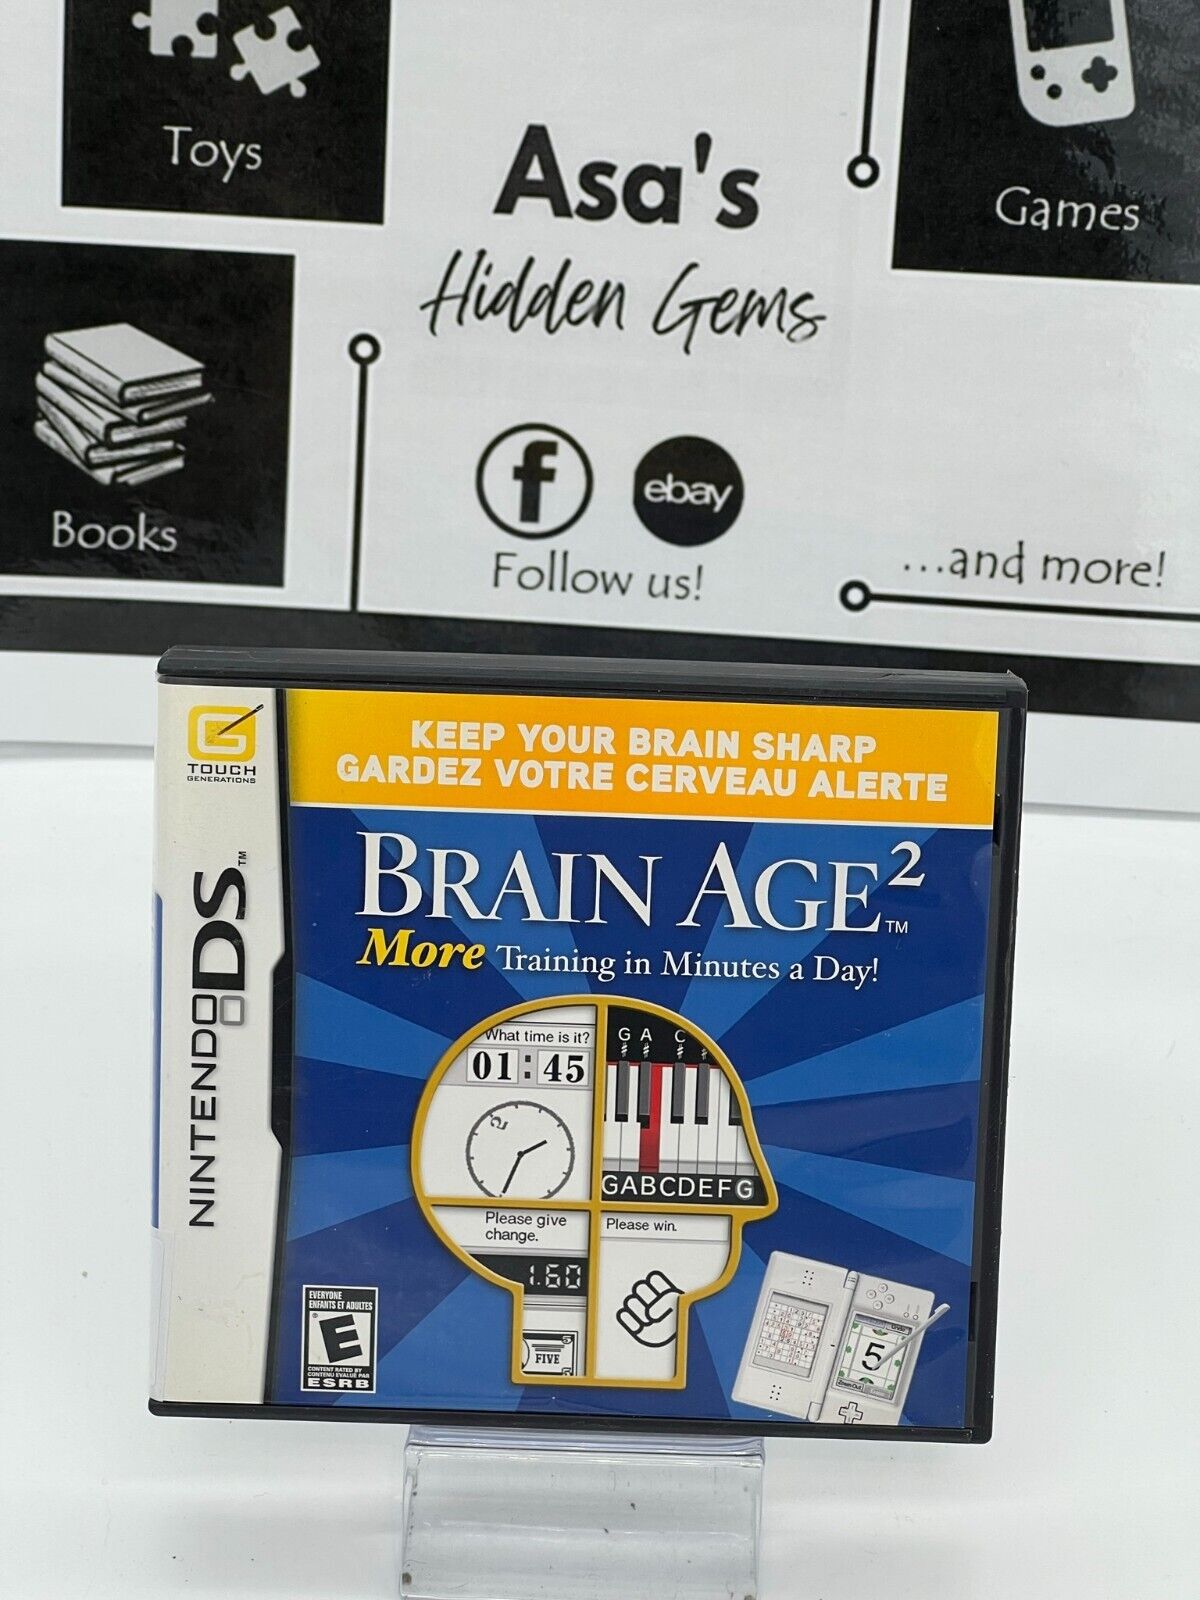 Brain Age 2: More Training in Minutes a Day (Nintendo DS/3DS, 2007) - Tested